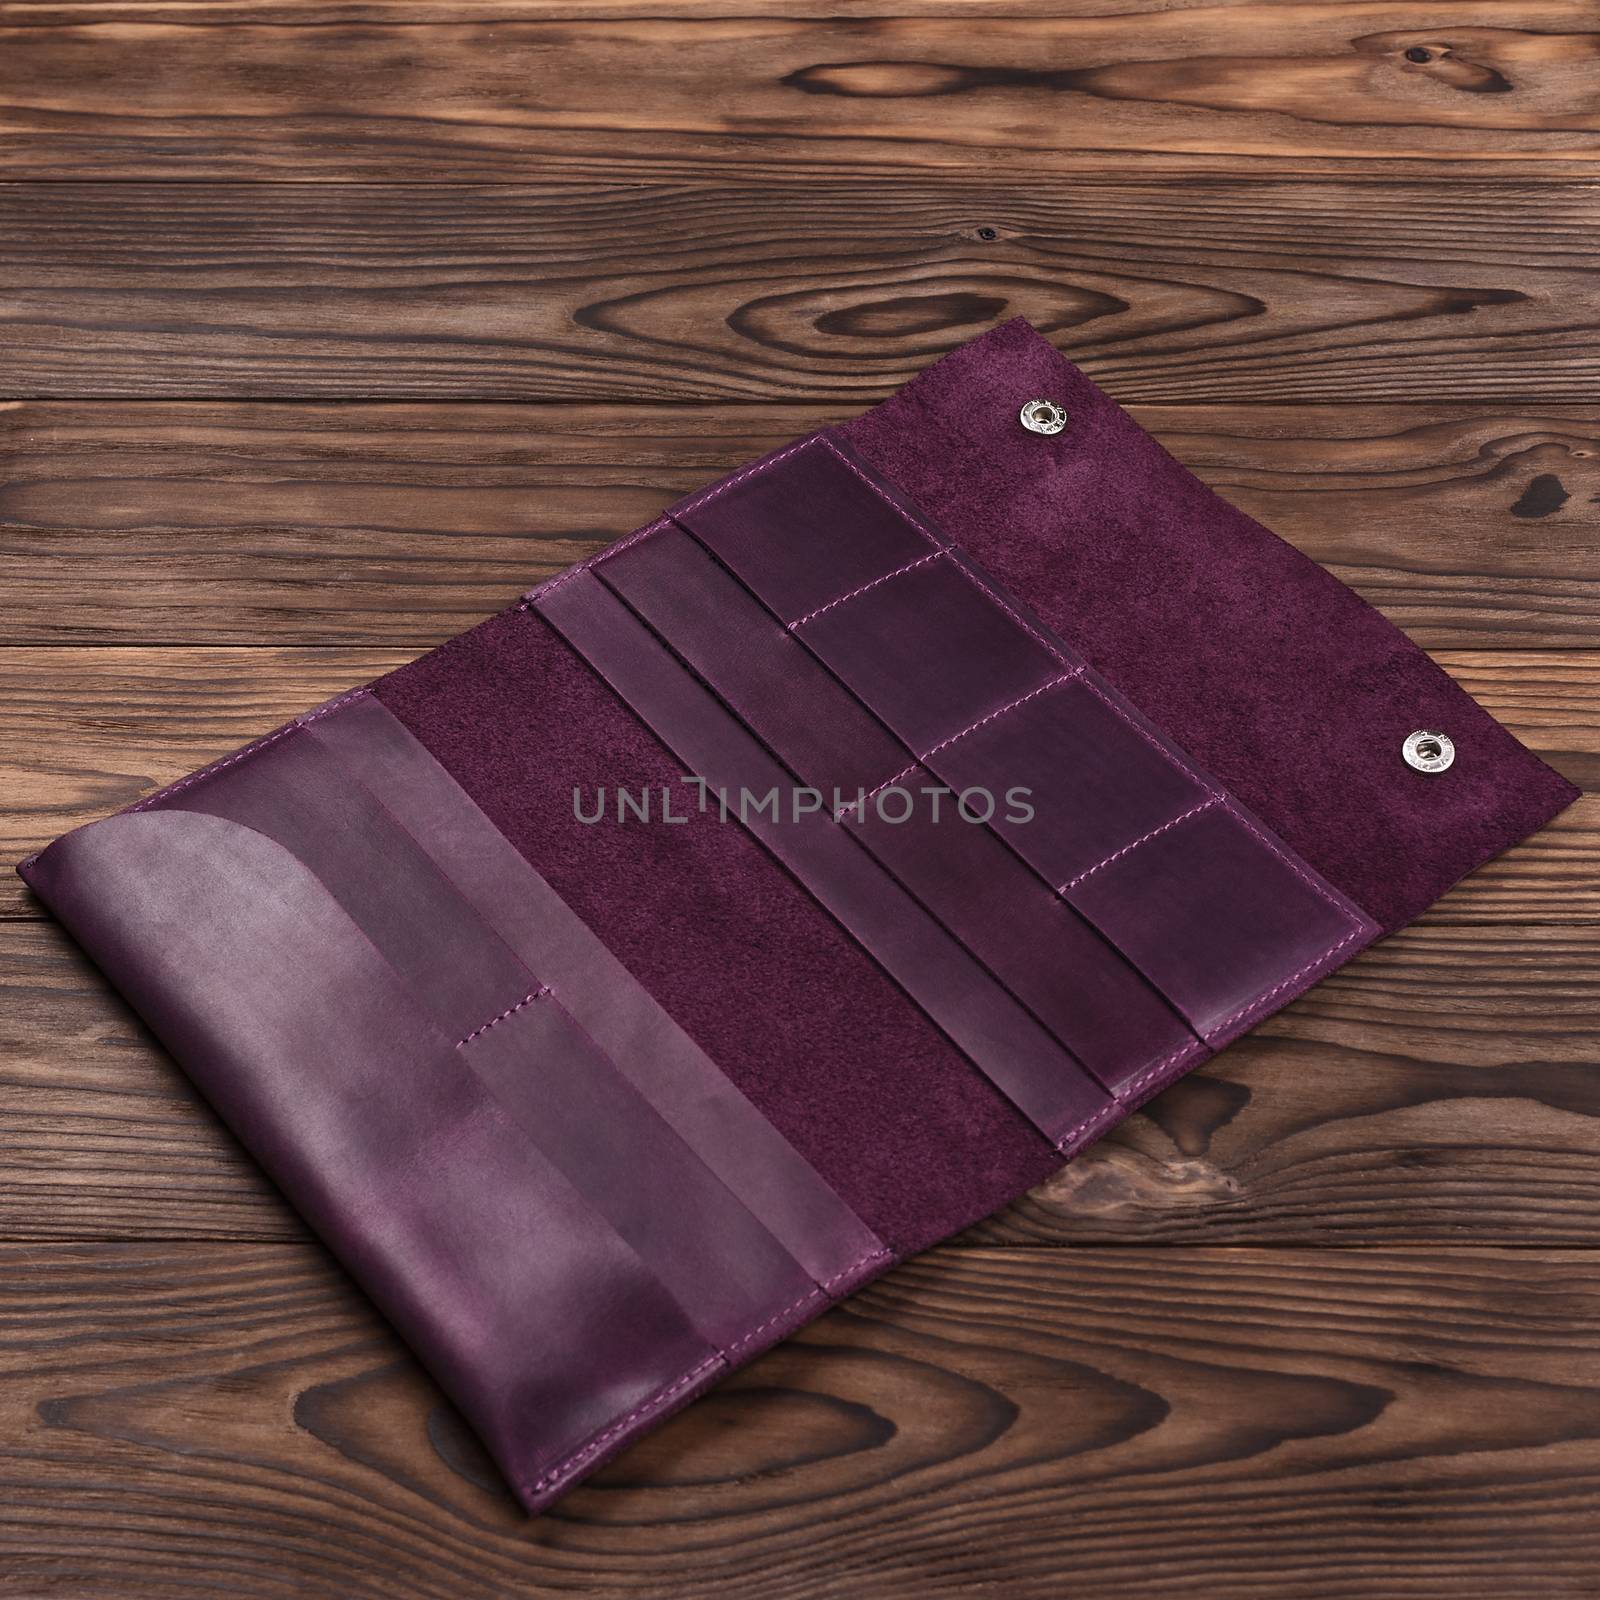 Handmade purple travel wallet lies on textured wooden backgroud closeup. Wallet is open and empty. Side view. Stock photo of businessman accessories.